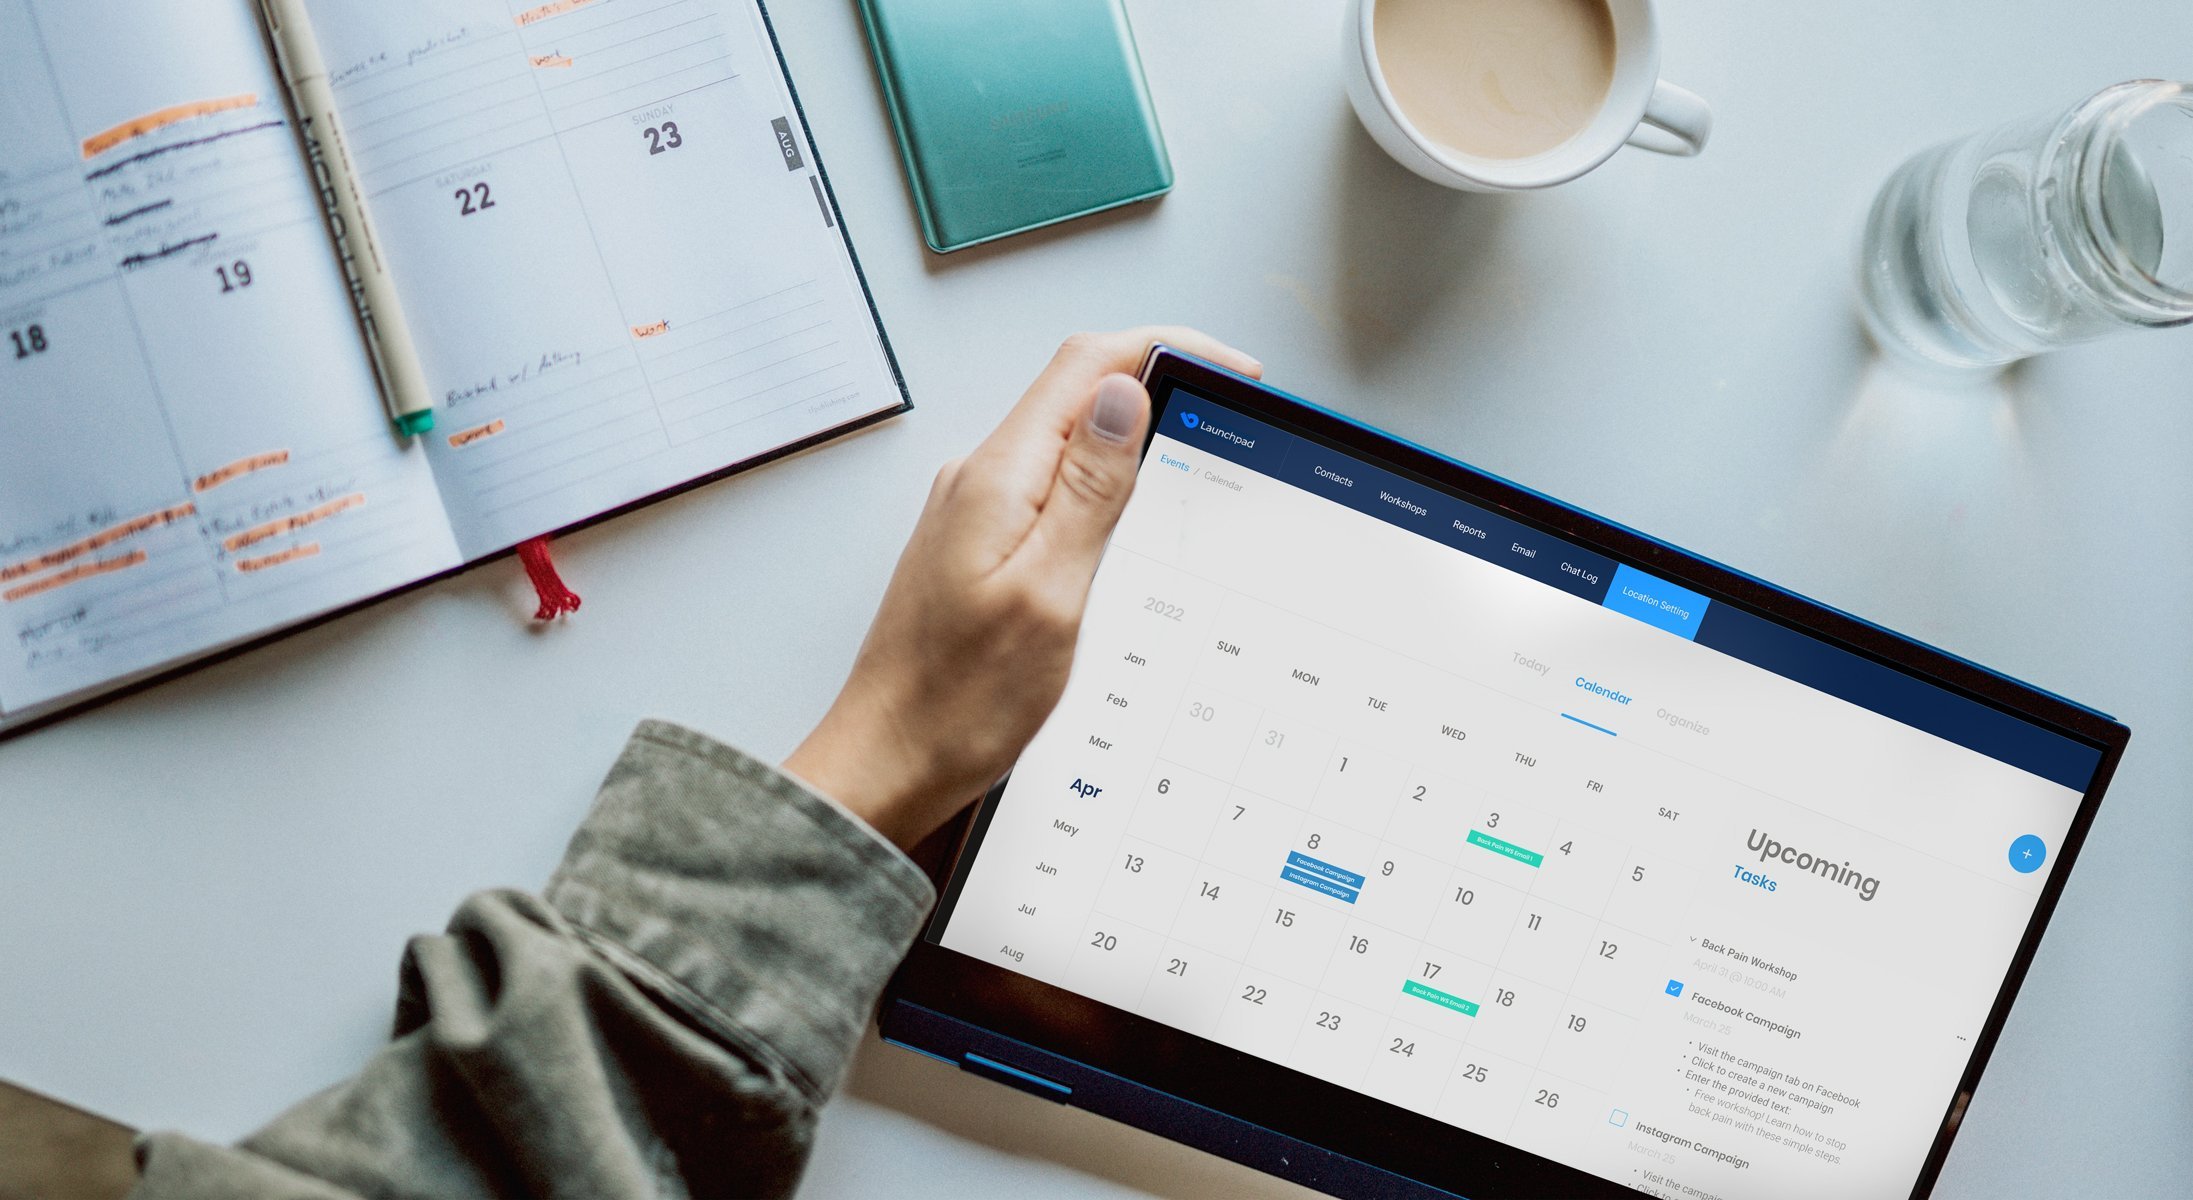 A pre-planned marketing calendar helps your team stay on track so you achieve the goals set in your marketing plan.